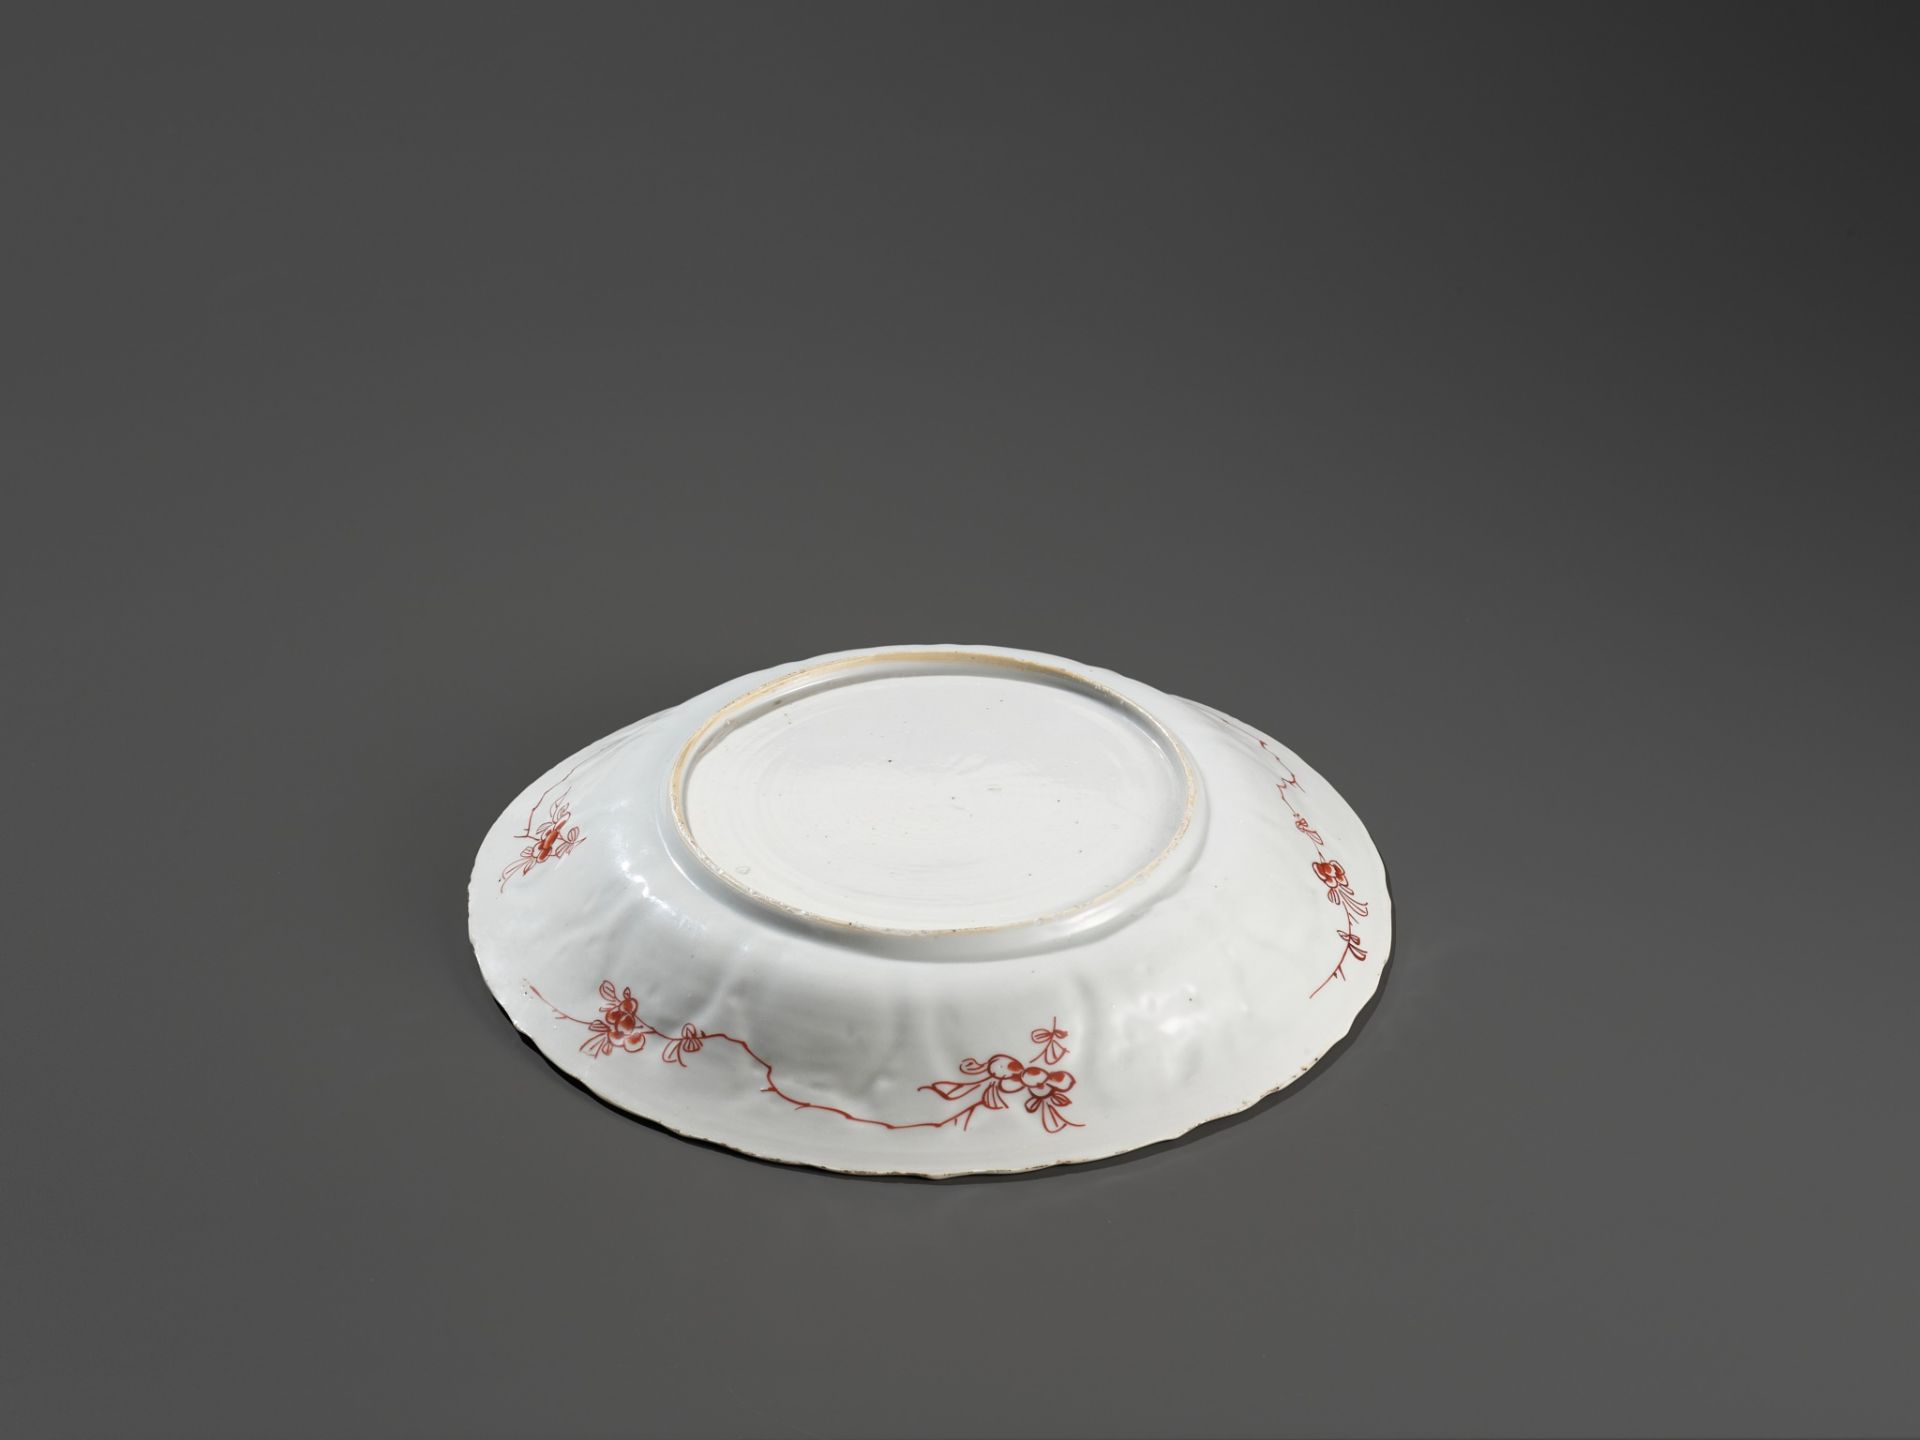 A BARBED-RIM IRON-RED AND GILT-DECORATED 'LADIES' DISH, KANGXI PERIOD - Image 5 of 6